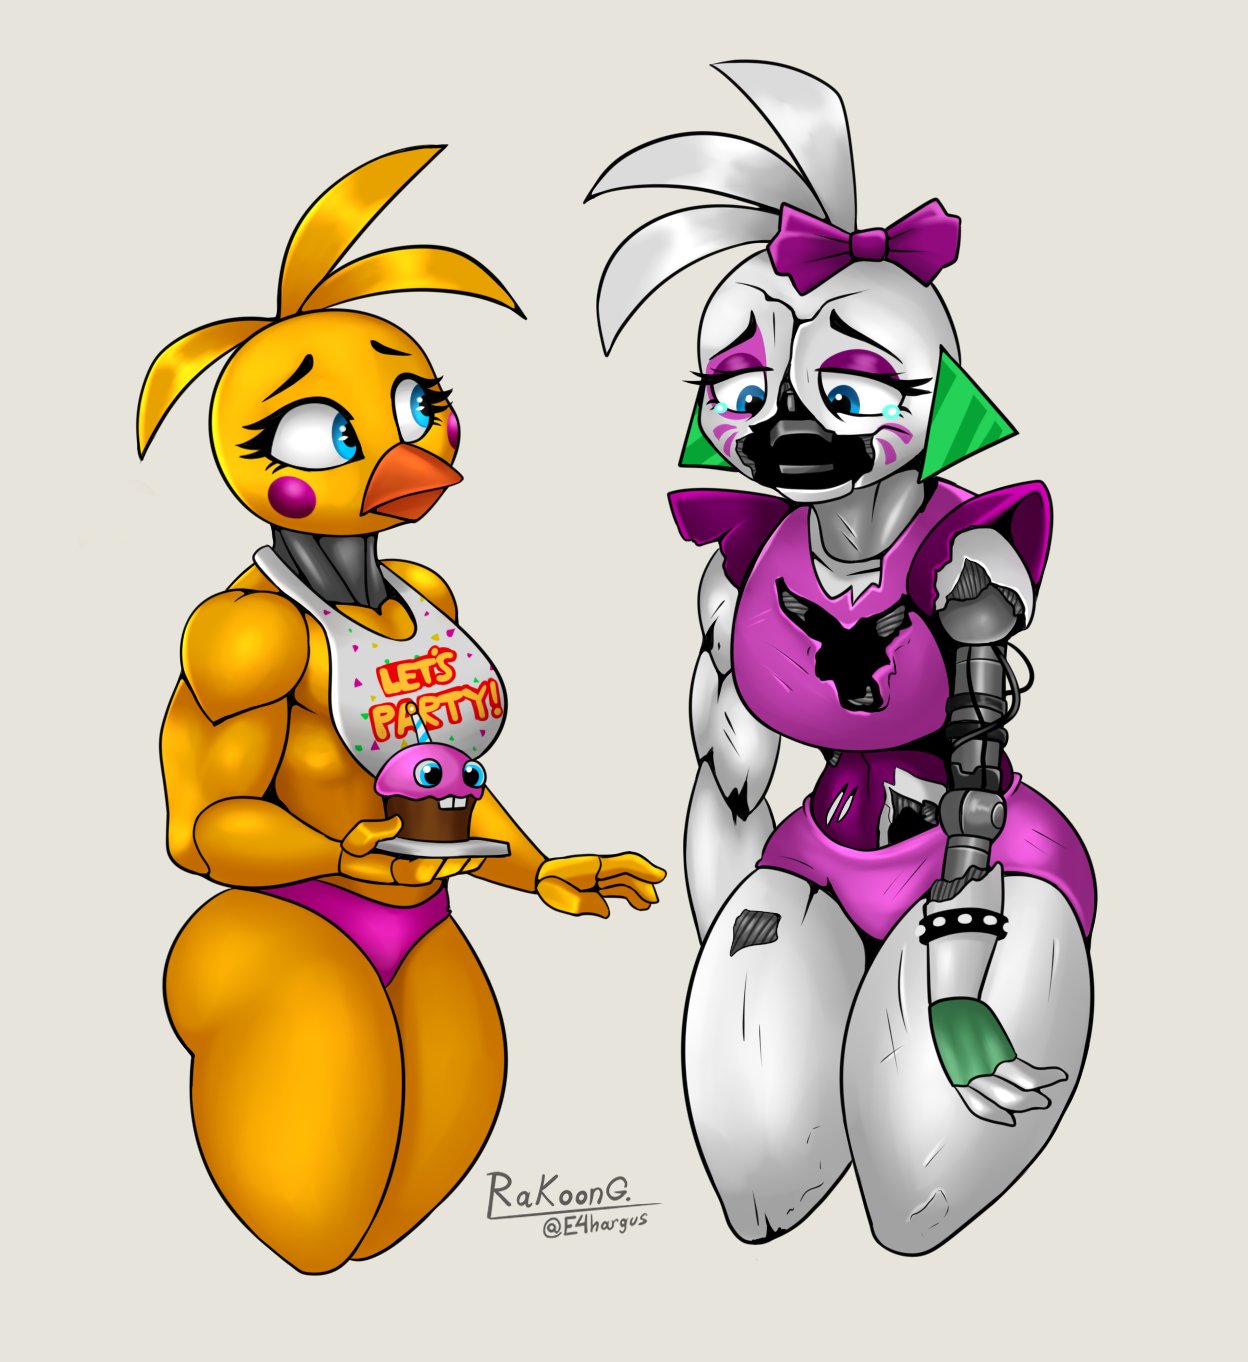 #FNAF. i will start the year with two chicas. #fnafsecuritybreachfanart. 